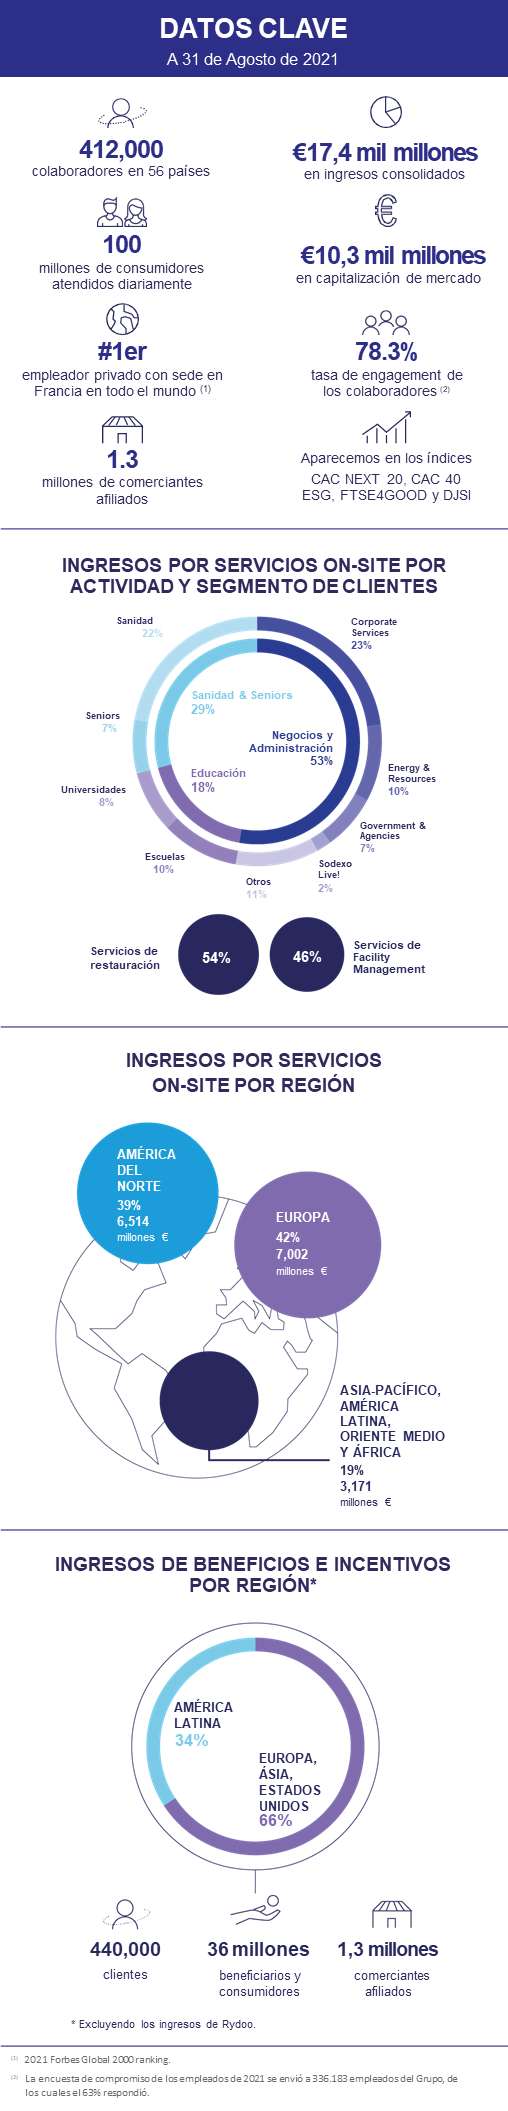 Sodexo key figures infographic, accessible version below